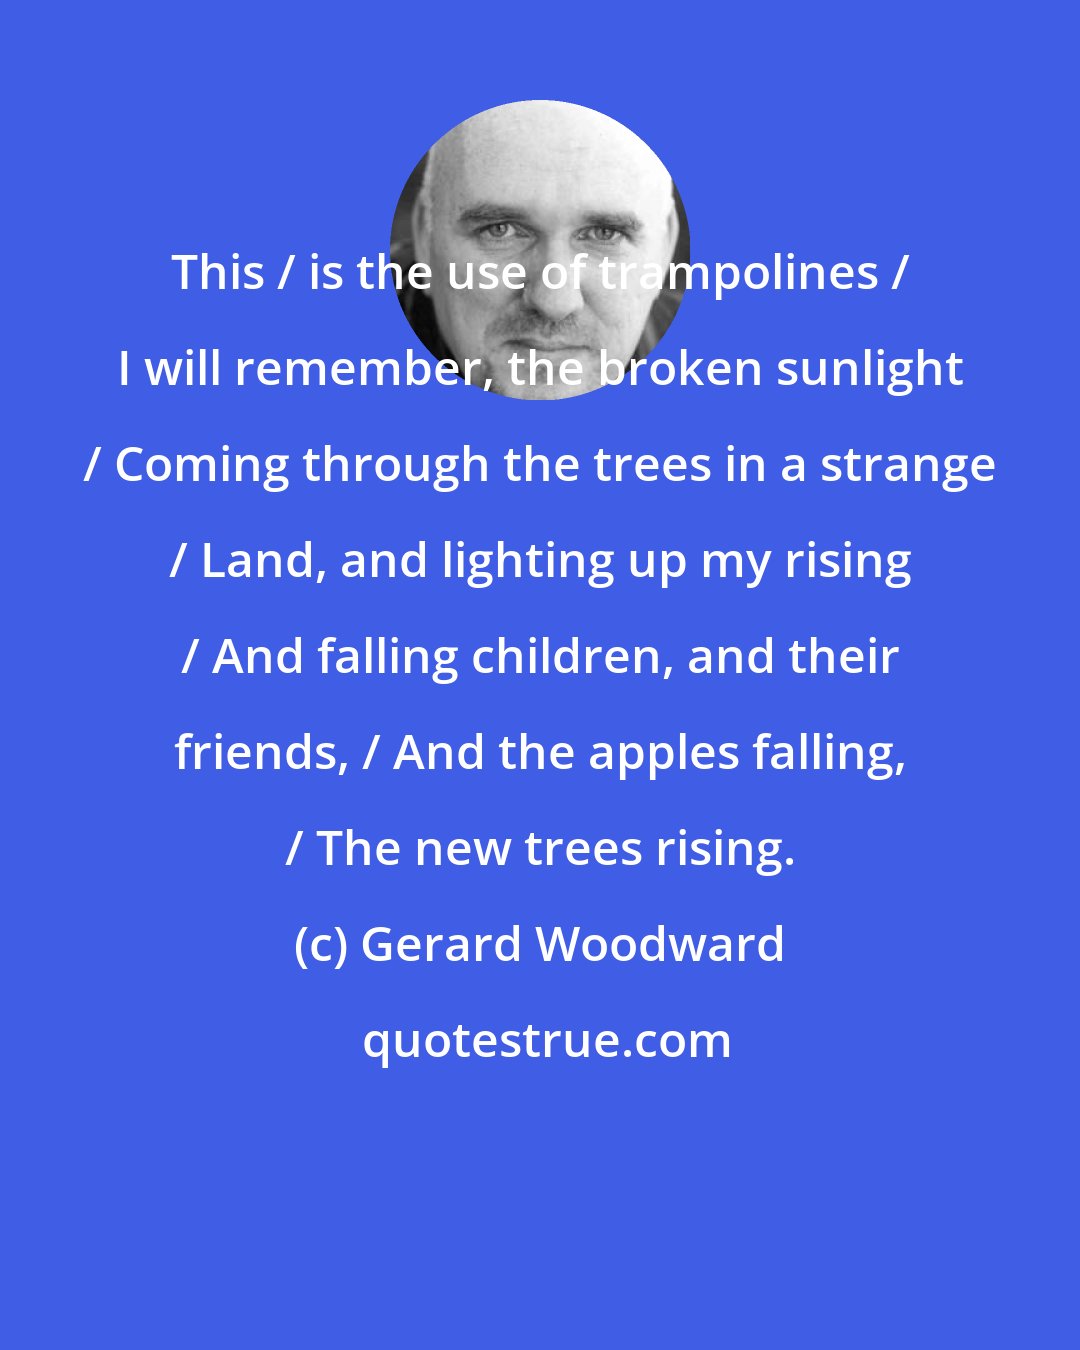 Gerard Woodward: This / is the use of trampolines / I will remember, the broken sunlight / Coming through the trees in a strange / Land, and lighting up my rising / And falling children, and their friends, / And the apples falling, / The new trees rising.